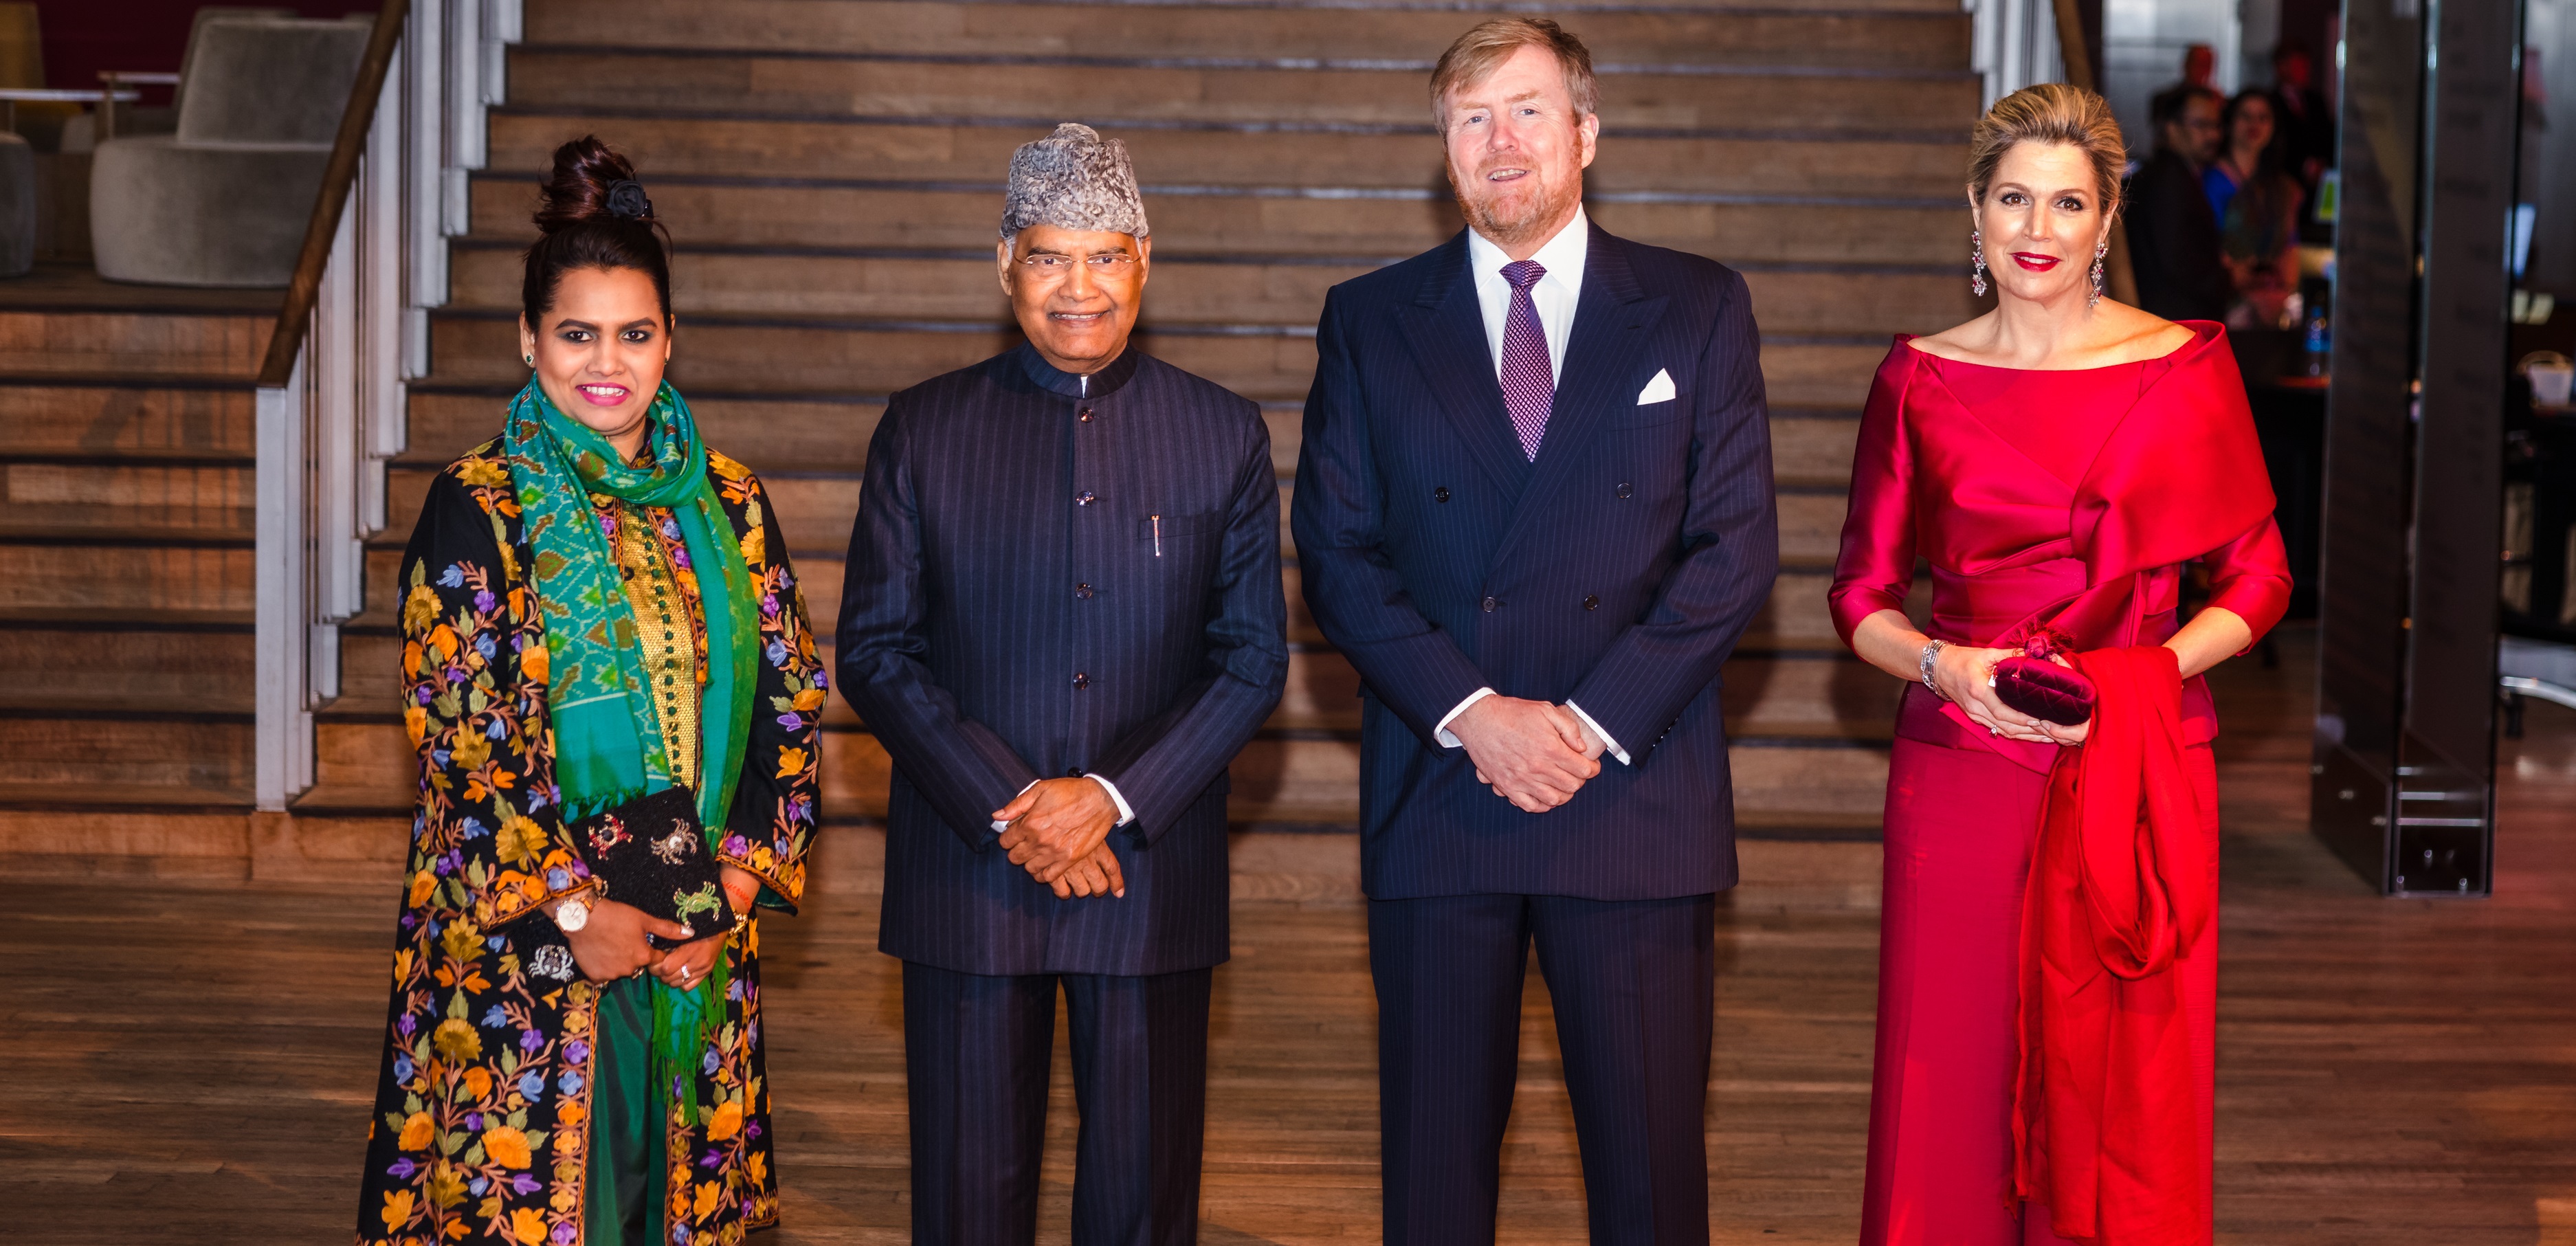 HM King Willem-Alexander and HM Queen Maxima with Hon'ble President Ram Nath Kovind and his daughter